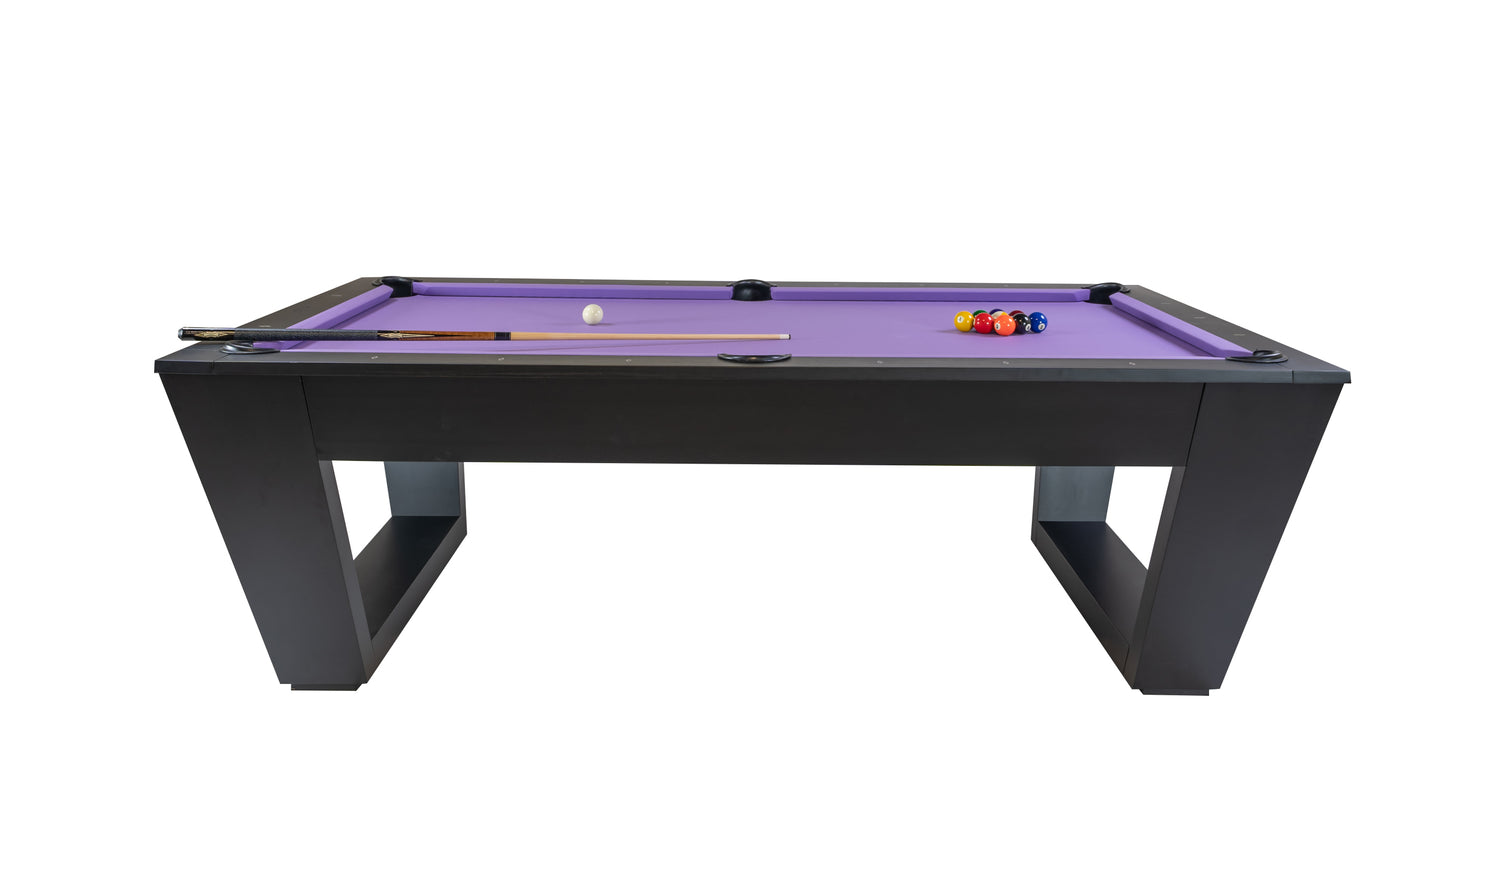 Legacy Billiards Tellico 8 Ft Pool Table in Raven Finish Side View with Racked Pool Balls and Cue